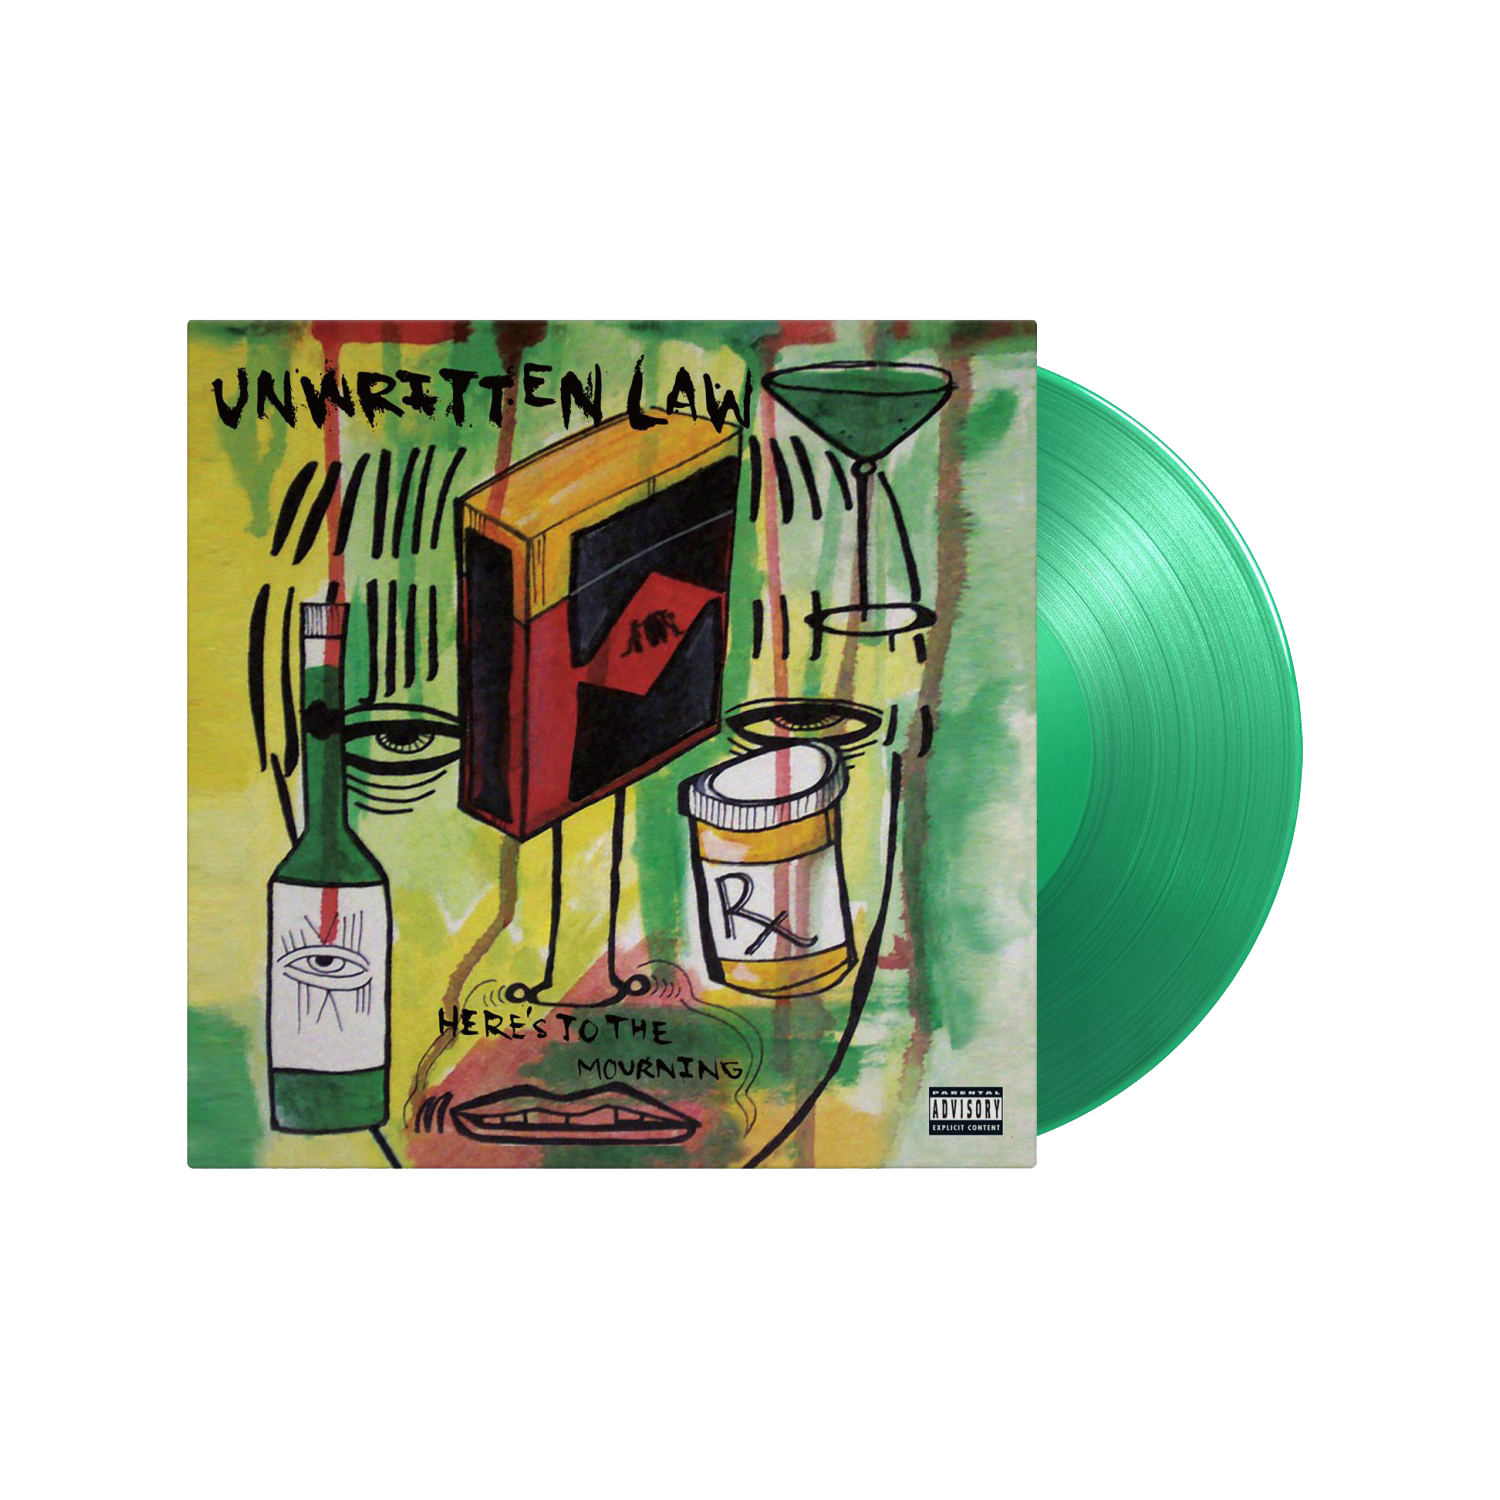 Unwritten Law - Here's To The Mourning: Limited Translucent Green Vinyl LP